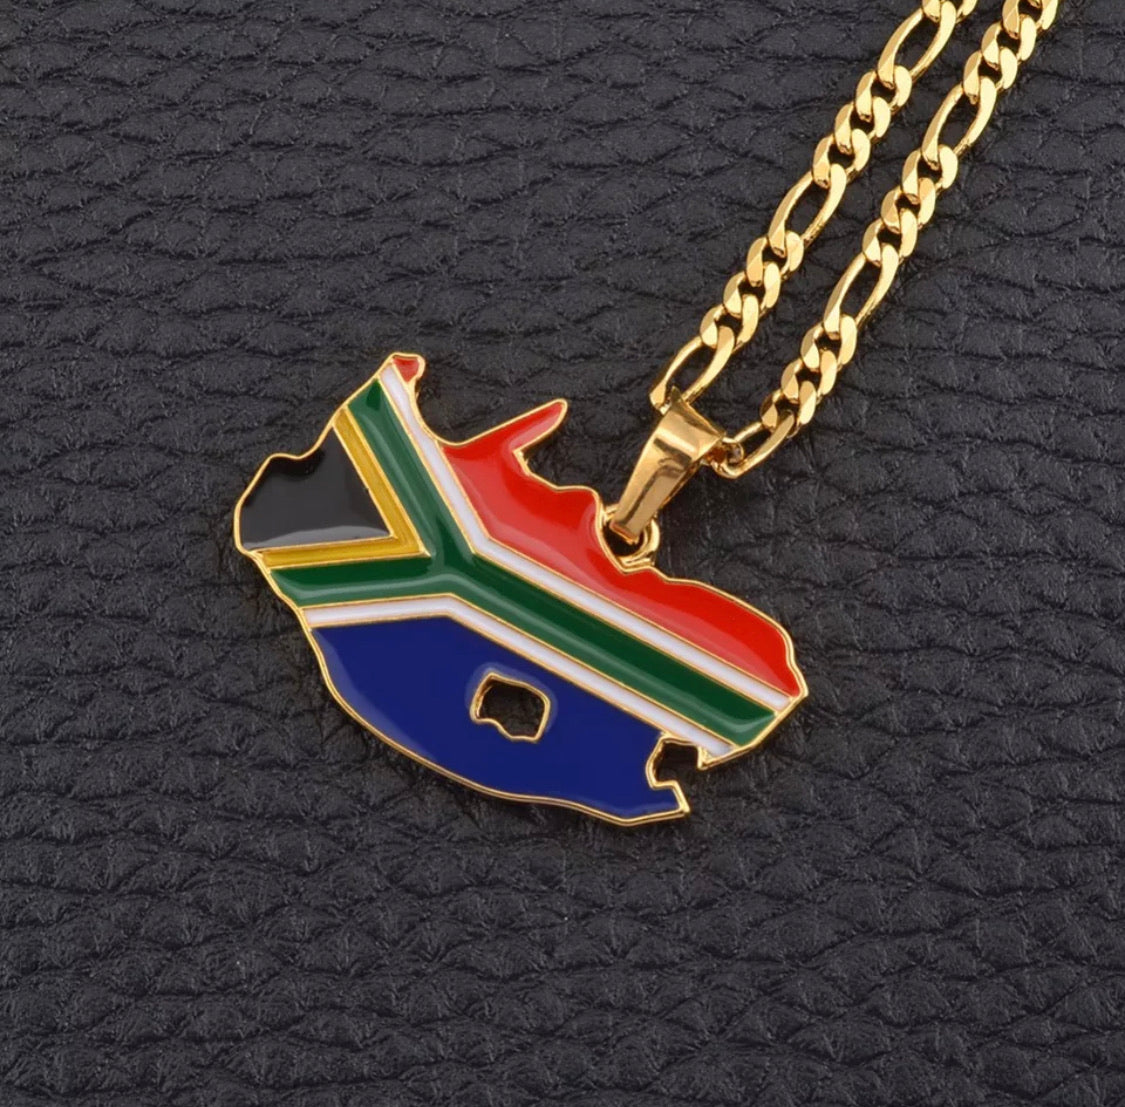 South Africa Map&Flag Pendant Necklaces Jewellery Gold Color for Women/Men,Africa Countries Maps South Africans